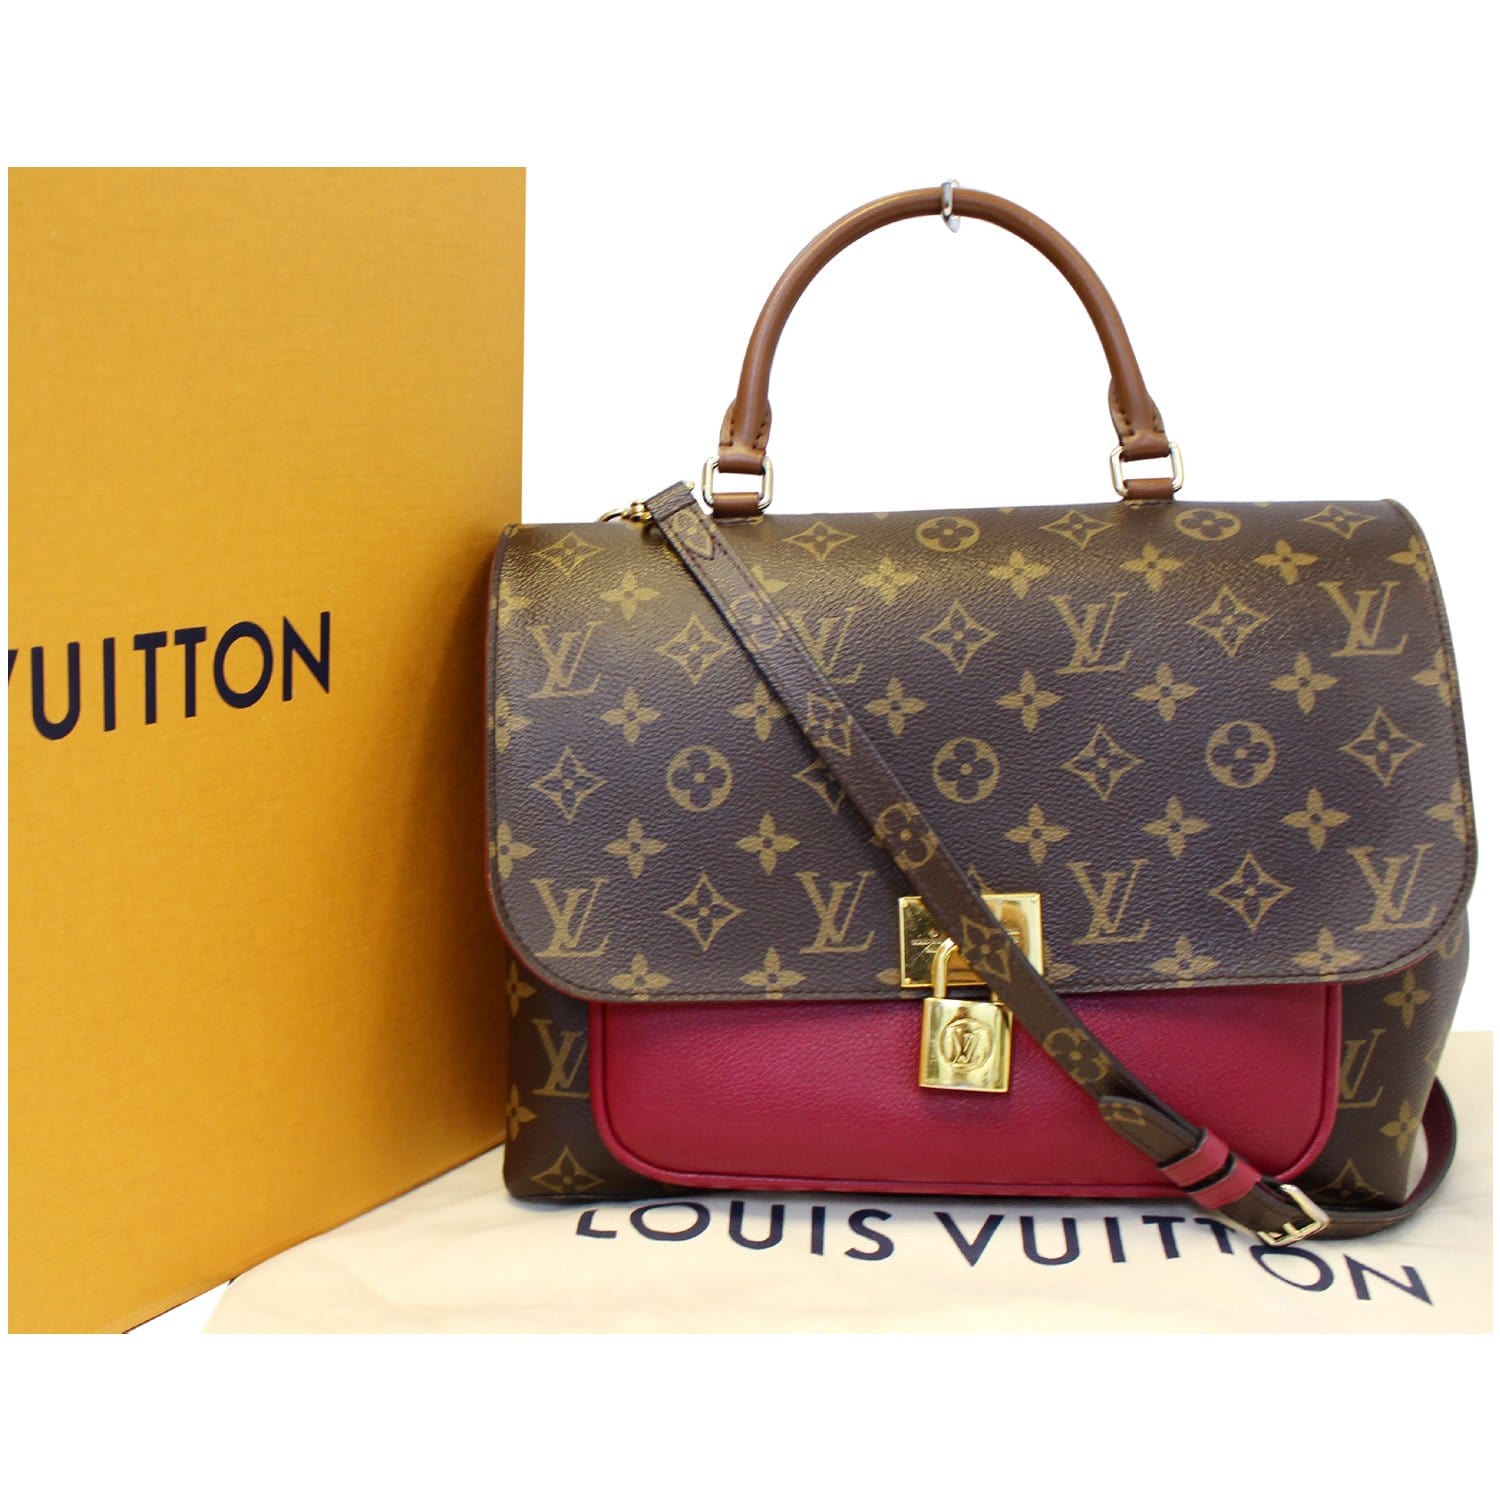 Louis Vuitton Marignan Shoulder Bag / Purse and Matching Wallet with Red  Lining